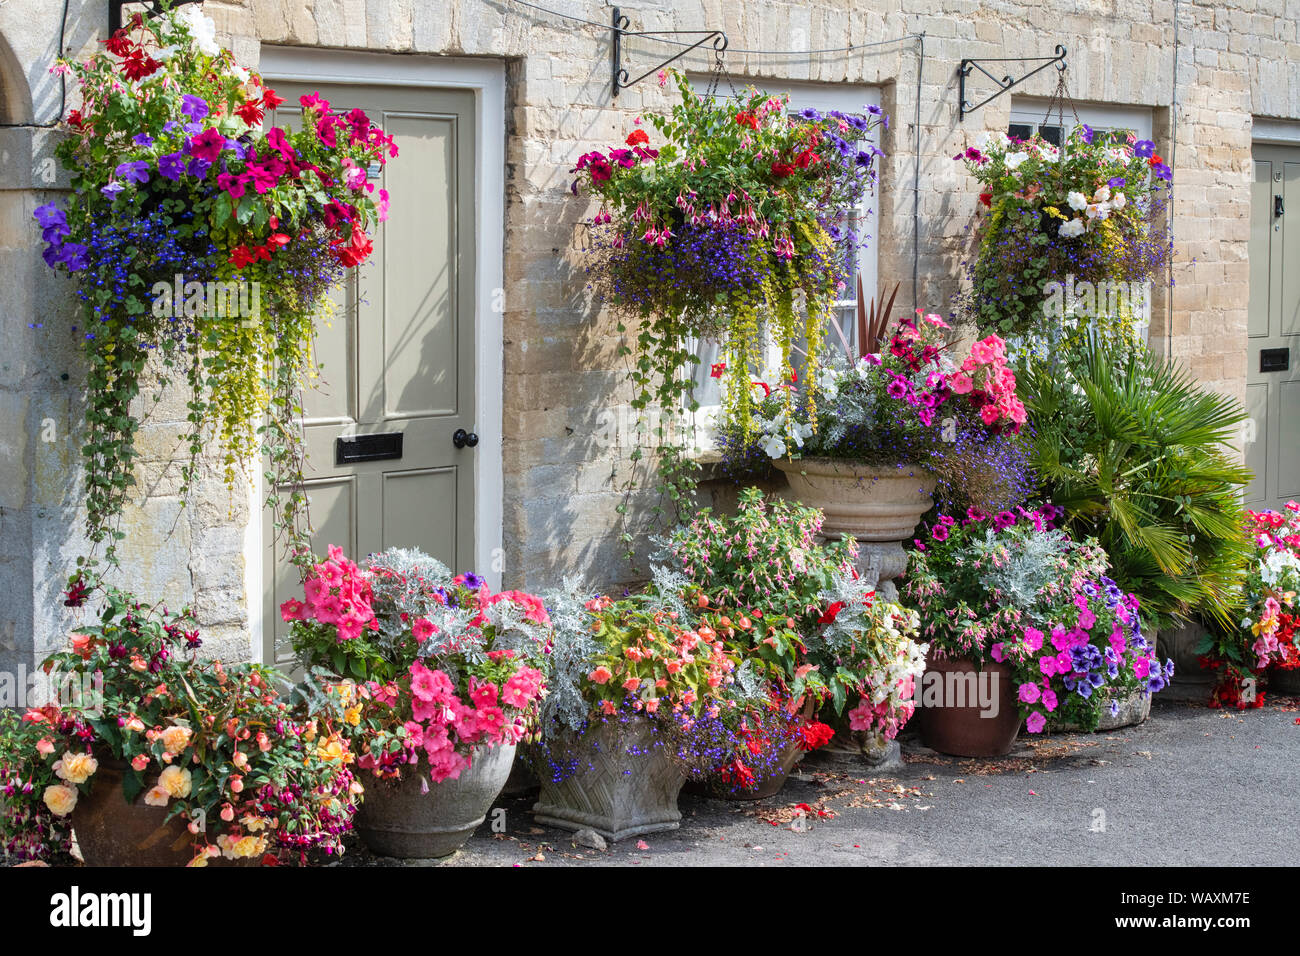 Floral hanging baskets and flower planters outside the Tontine Buildings along Cecily hill, Cirencester, Cotswolds, Gloucestershire, England Stock Photo